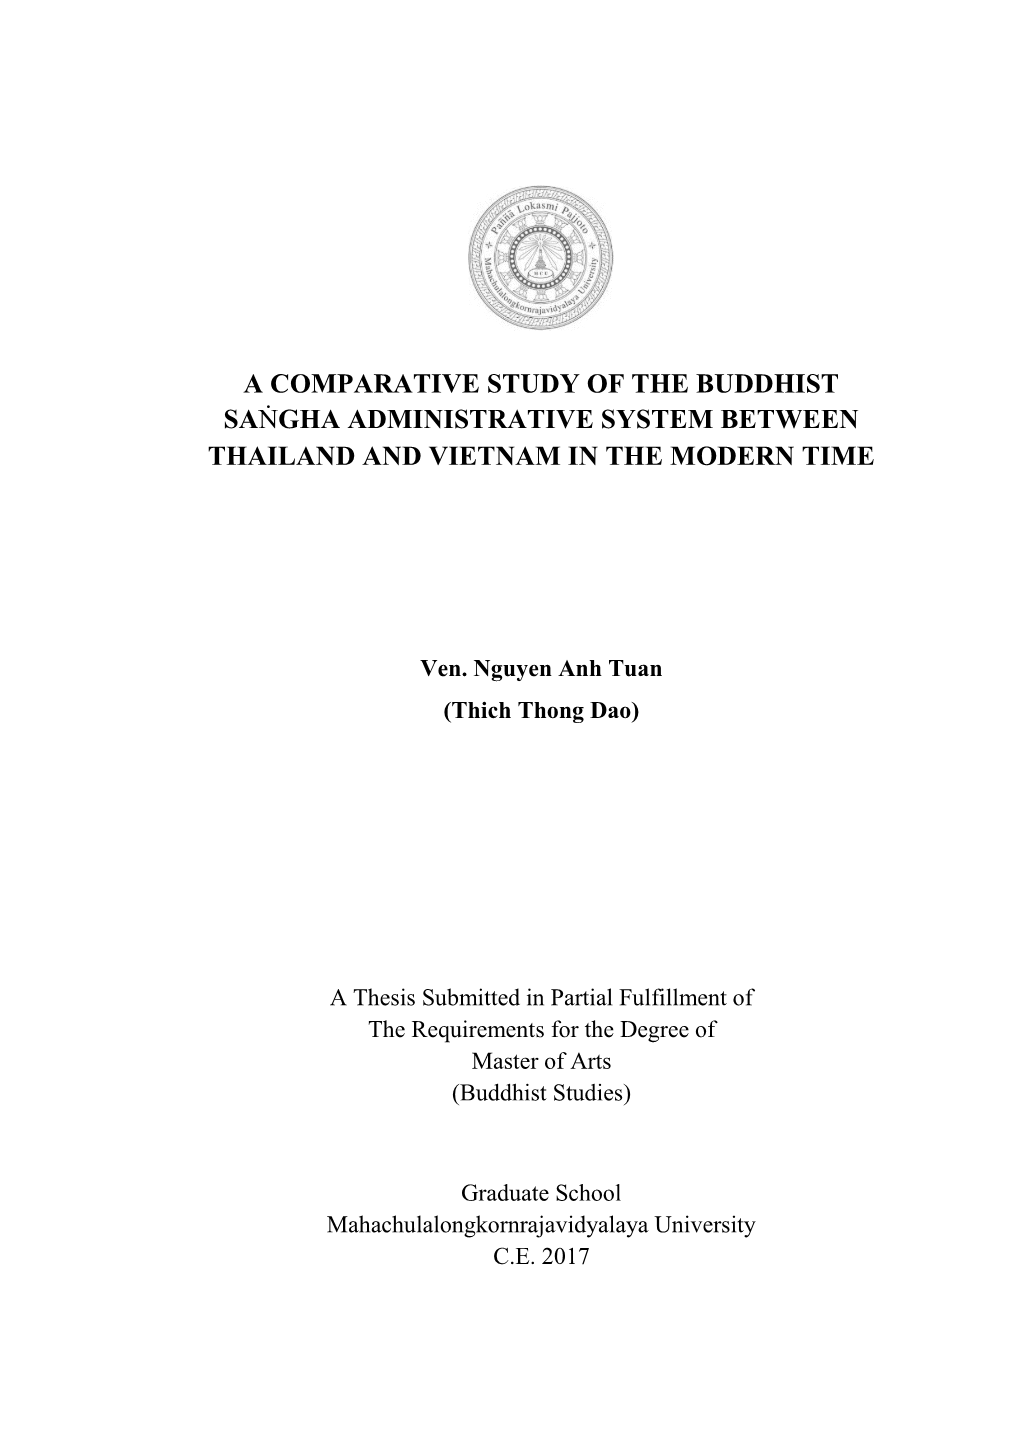 A Comparative Study of the Buddhist Saṅgha Administrative System Between Thailand and Vietnam in the Modern Time